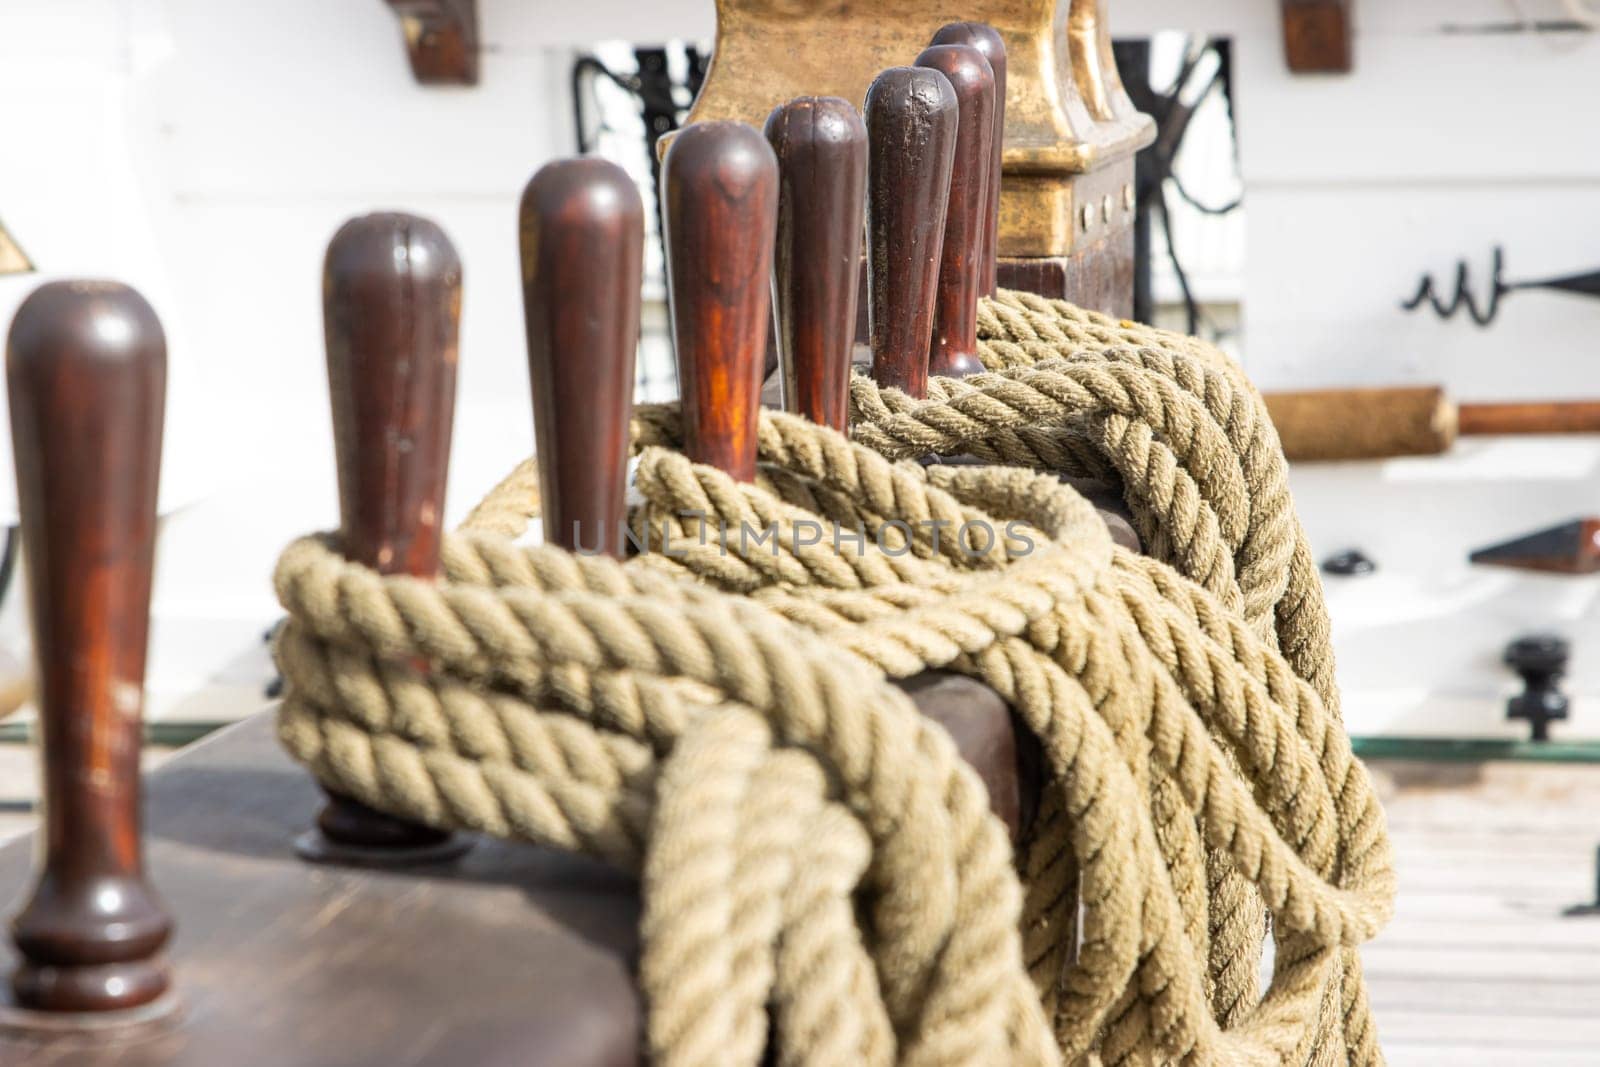 Ship's tackle on the deck of battle ship - ropes - military historical vessel by Studia72